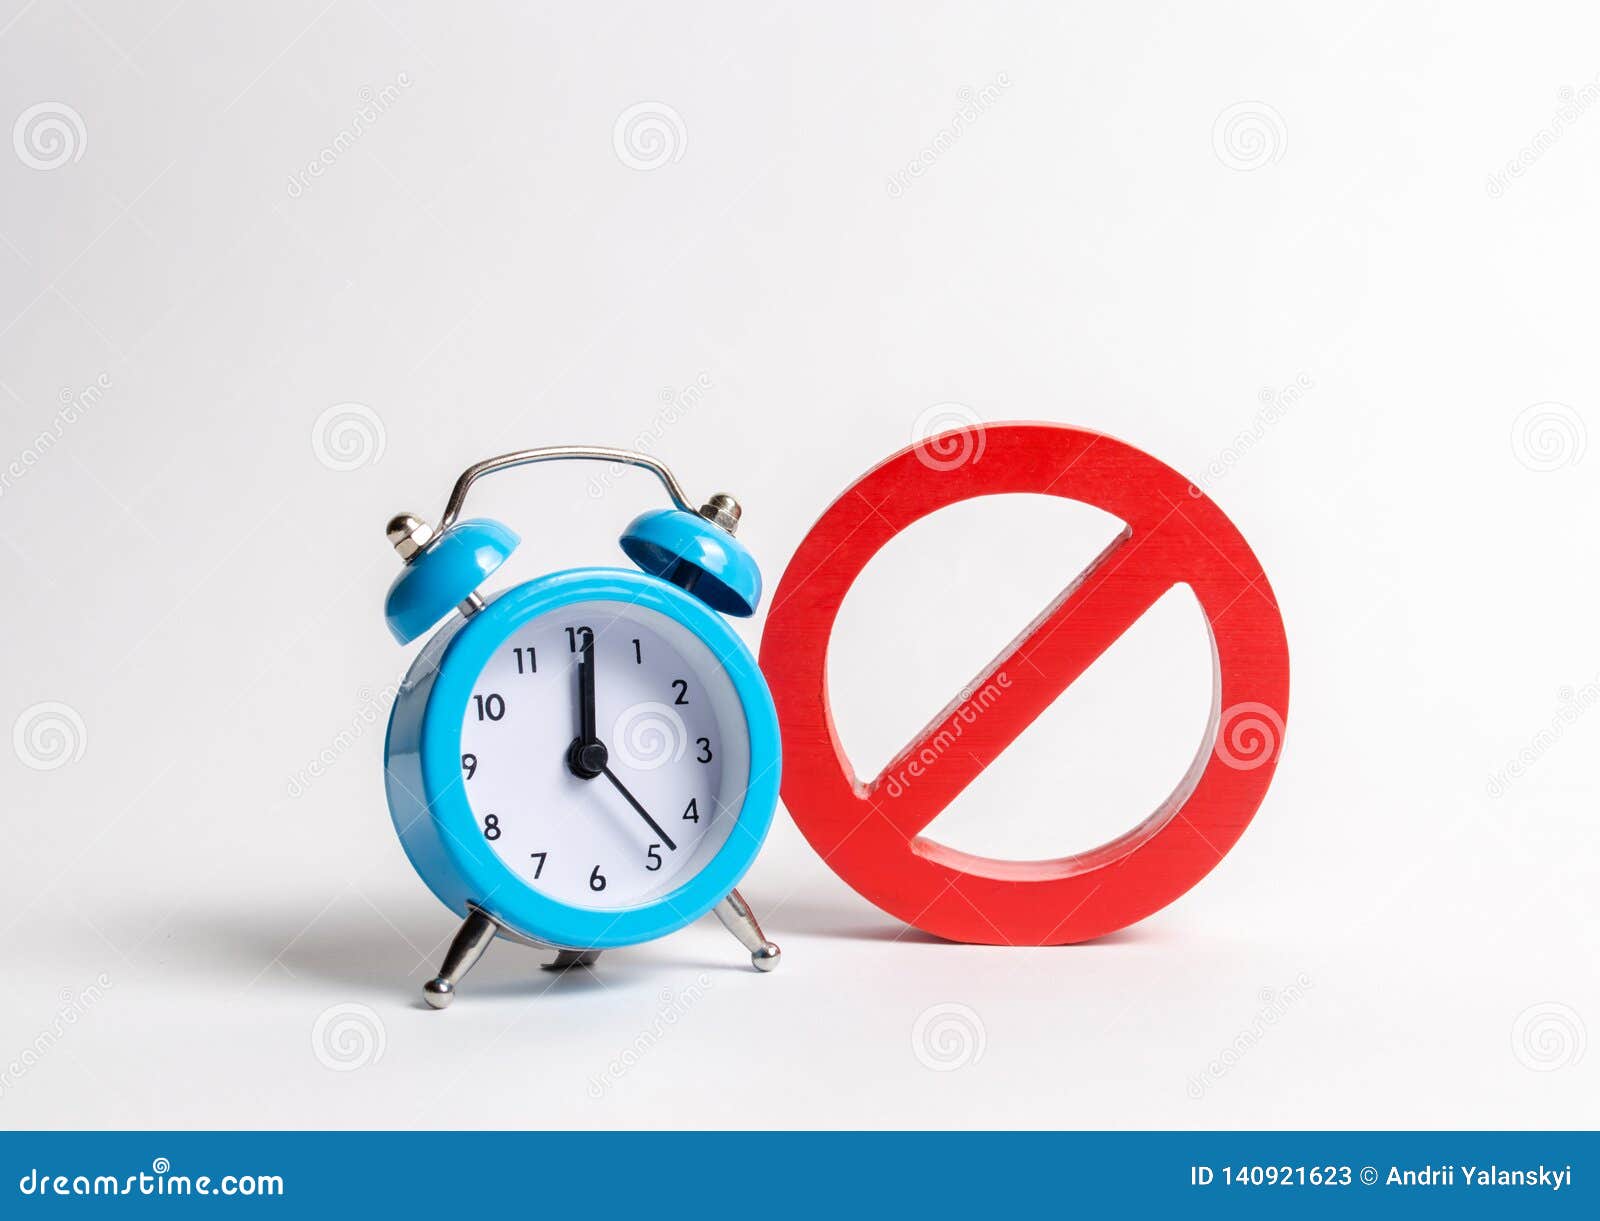 no sign and blue clock on a white background. unavailability at certain hours. temporary restrictions and prohibitions